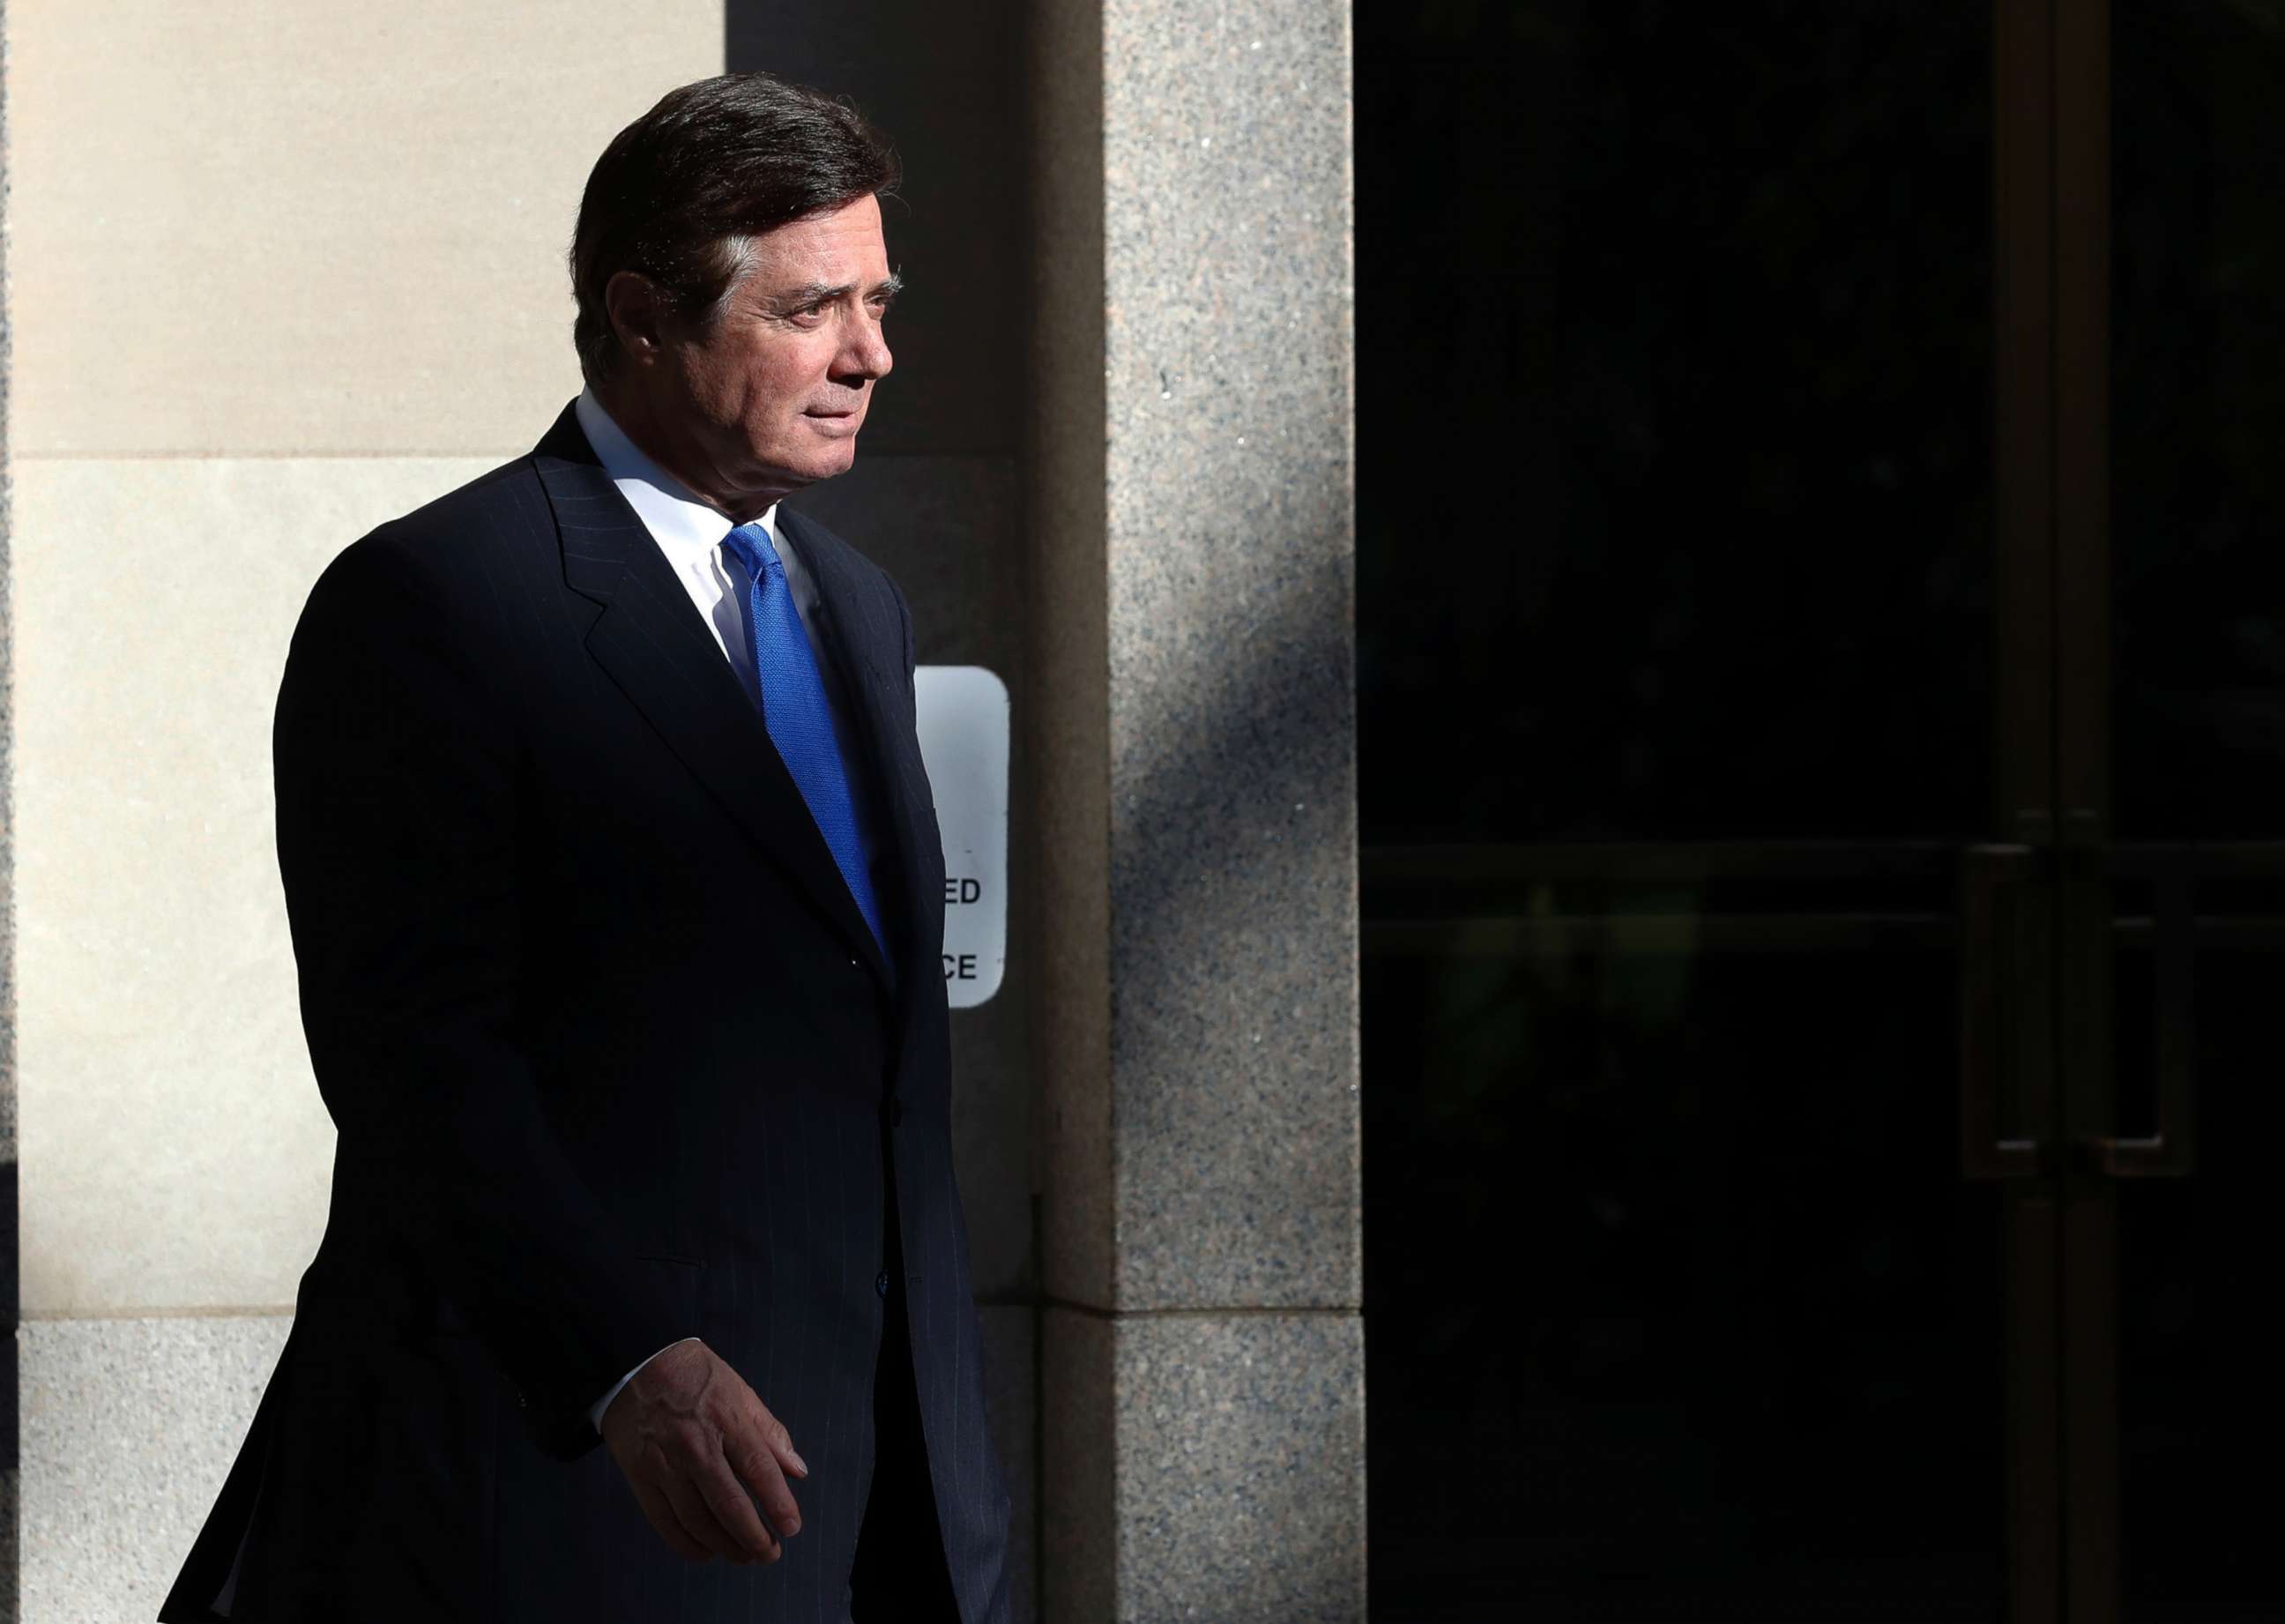 PHOTO: Paul Manafort walks from Federal District Court in Washington, D.C., Oct. 30, 2017.